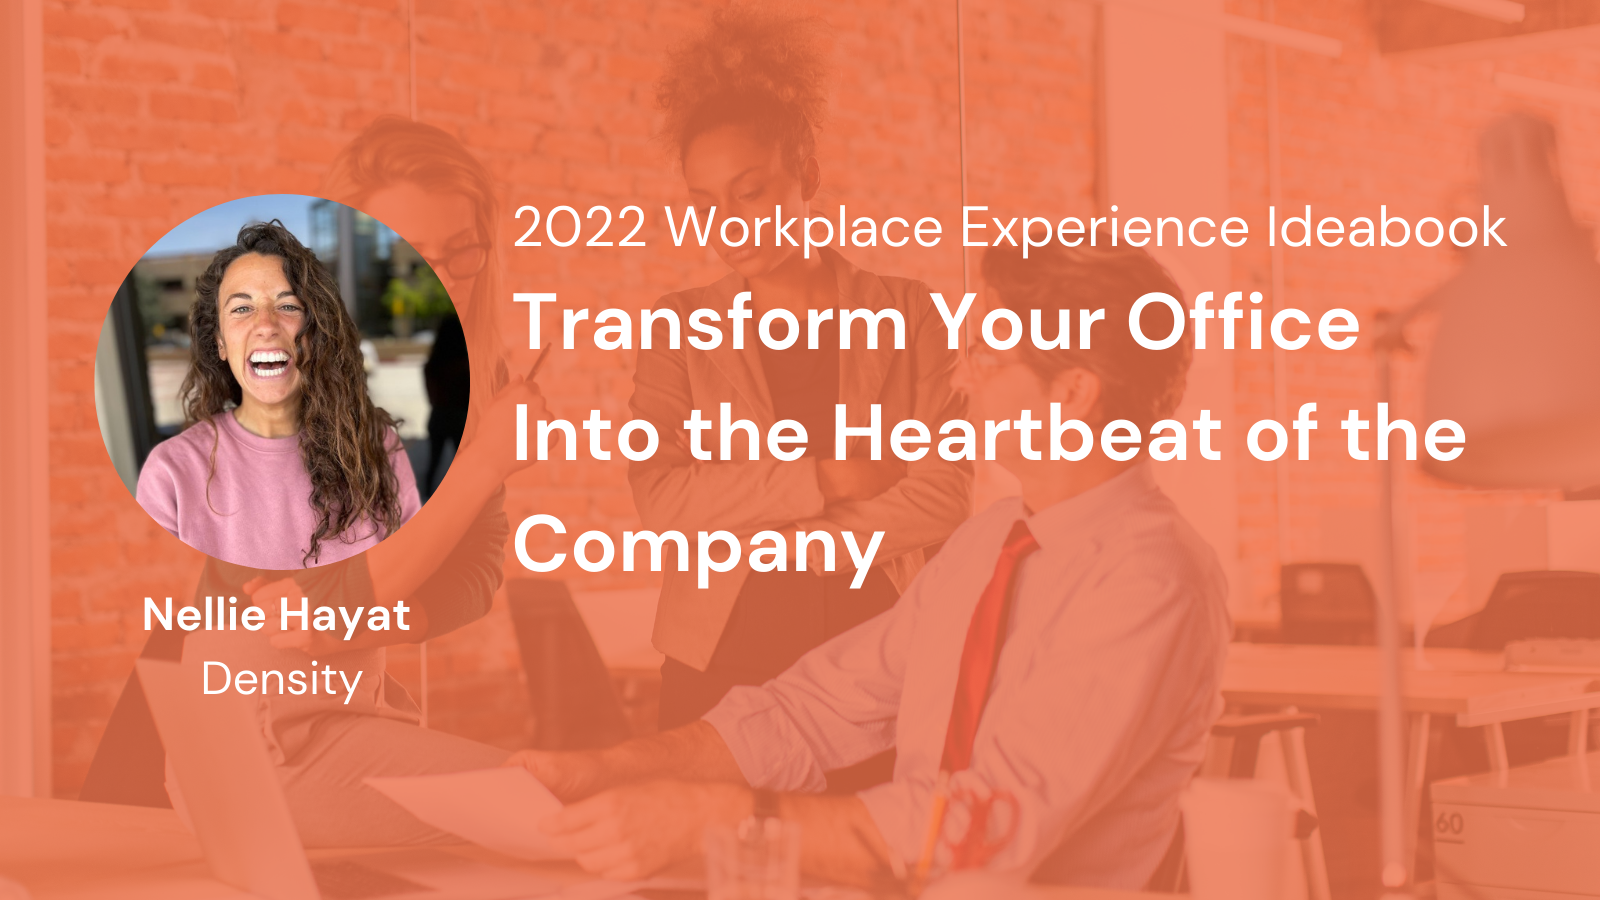 Transform Your Office Into the Heartbeat of the Company